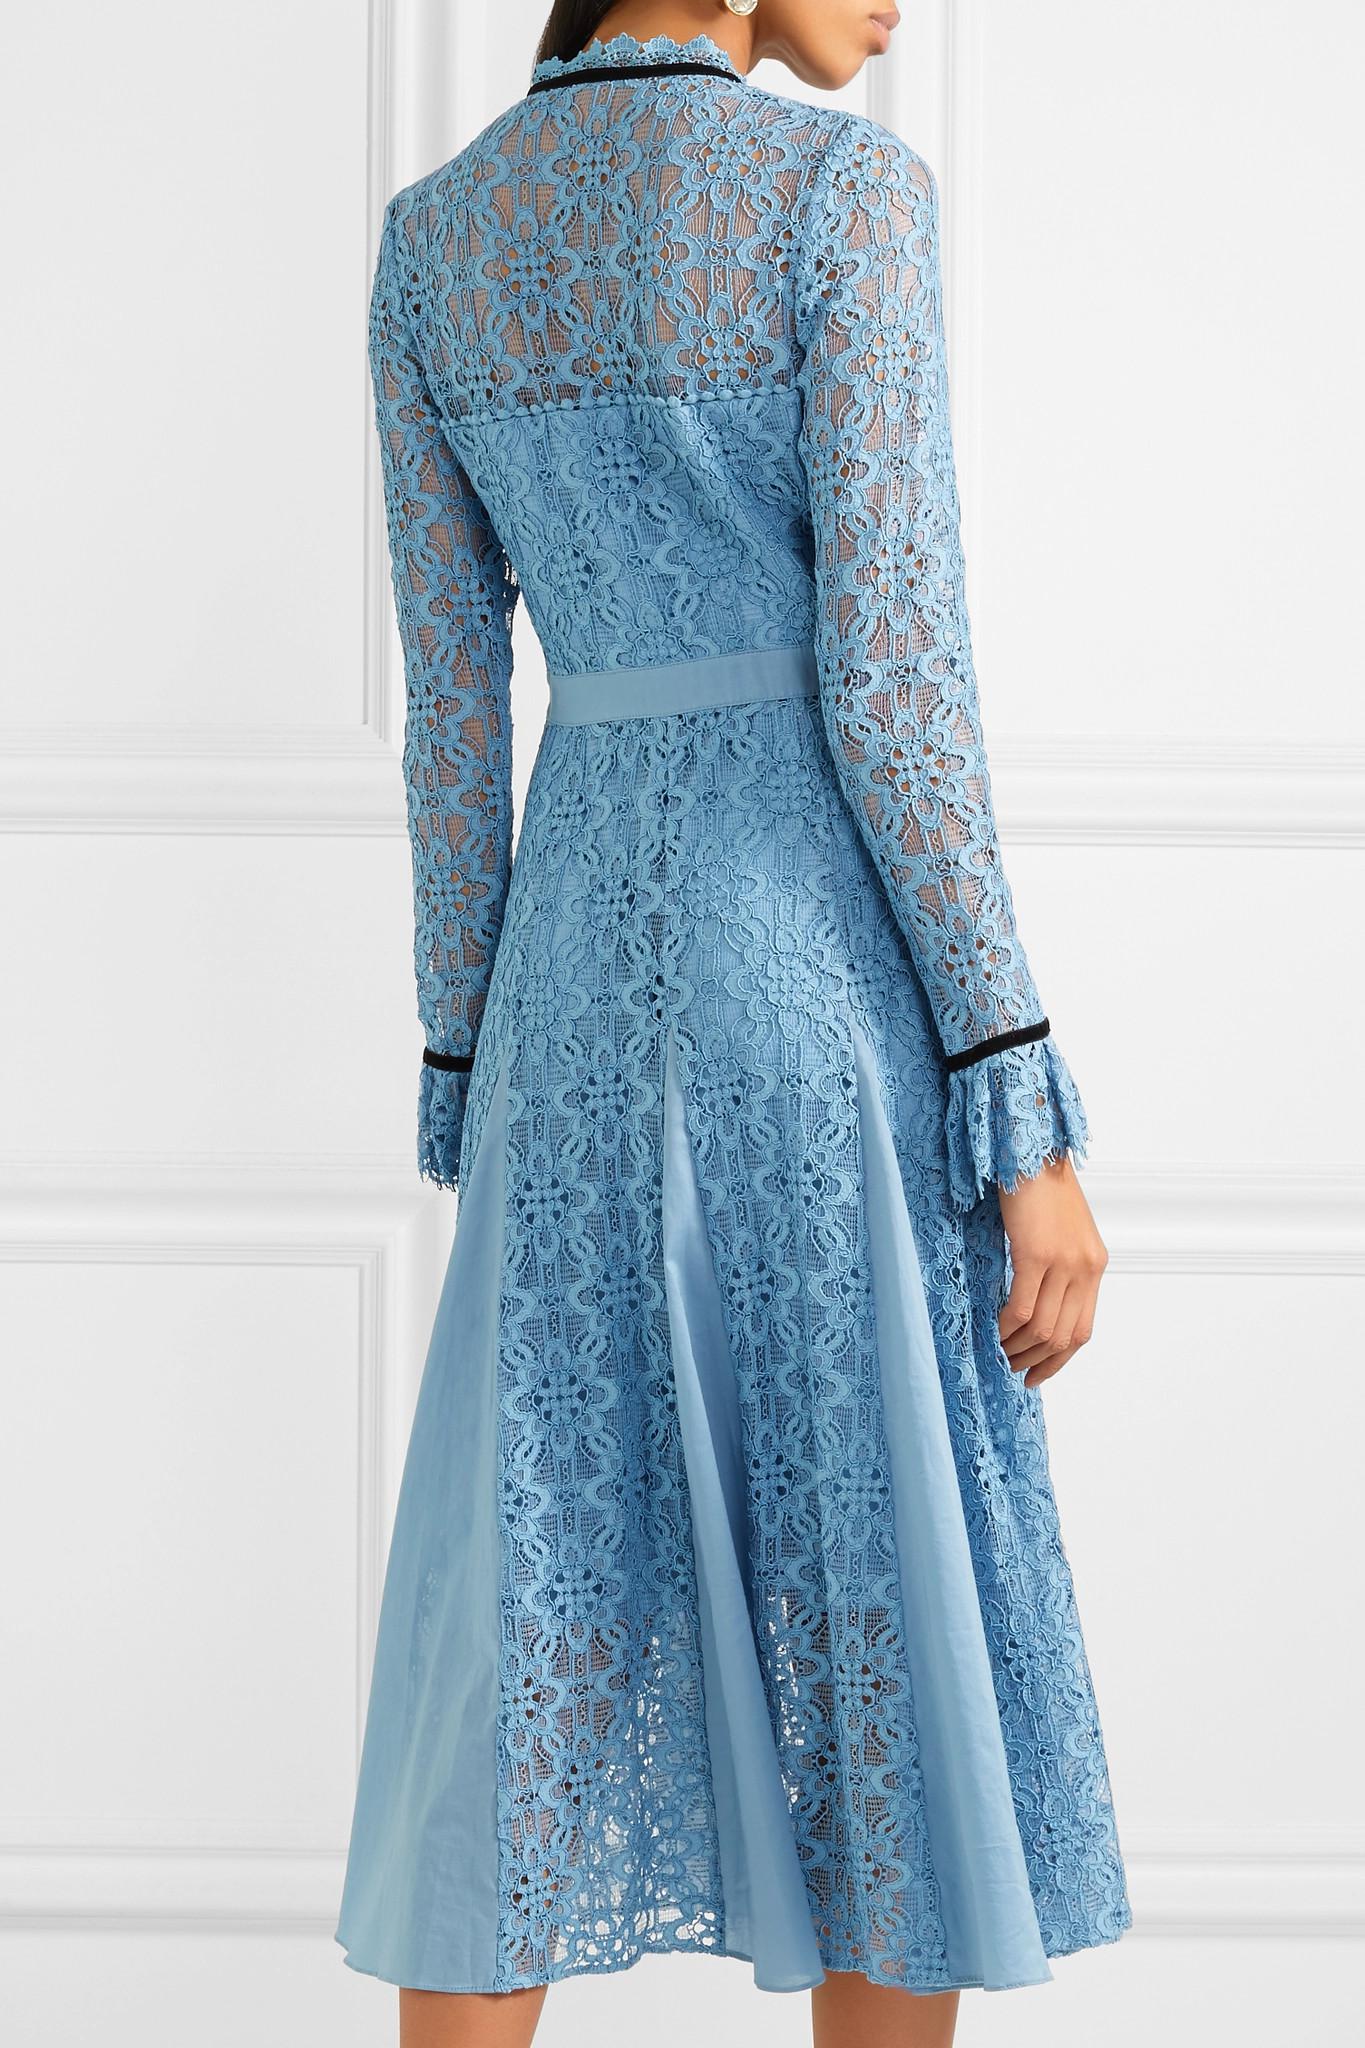 Temperley London Eclipse Corded Lace Midi Dress in Blue - Lyst